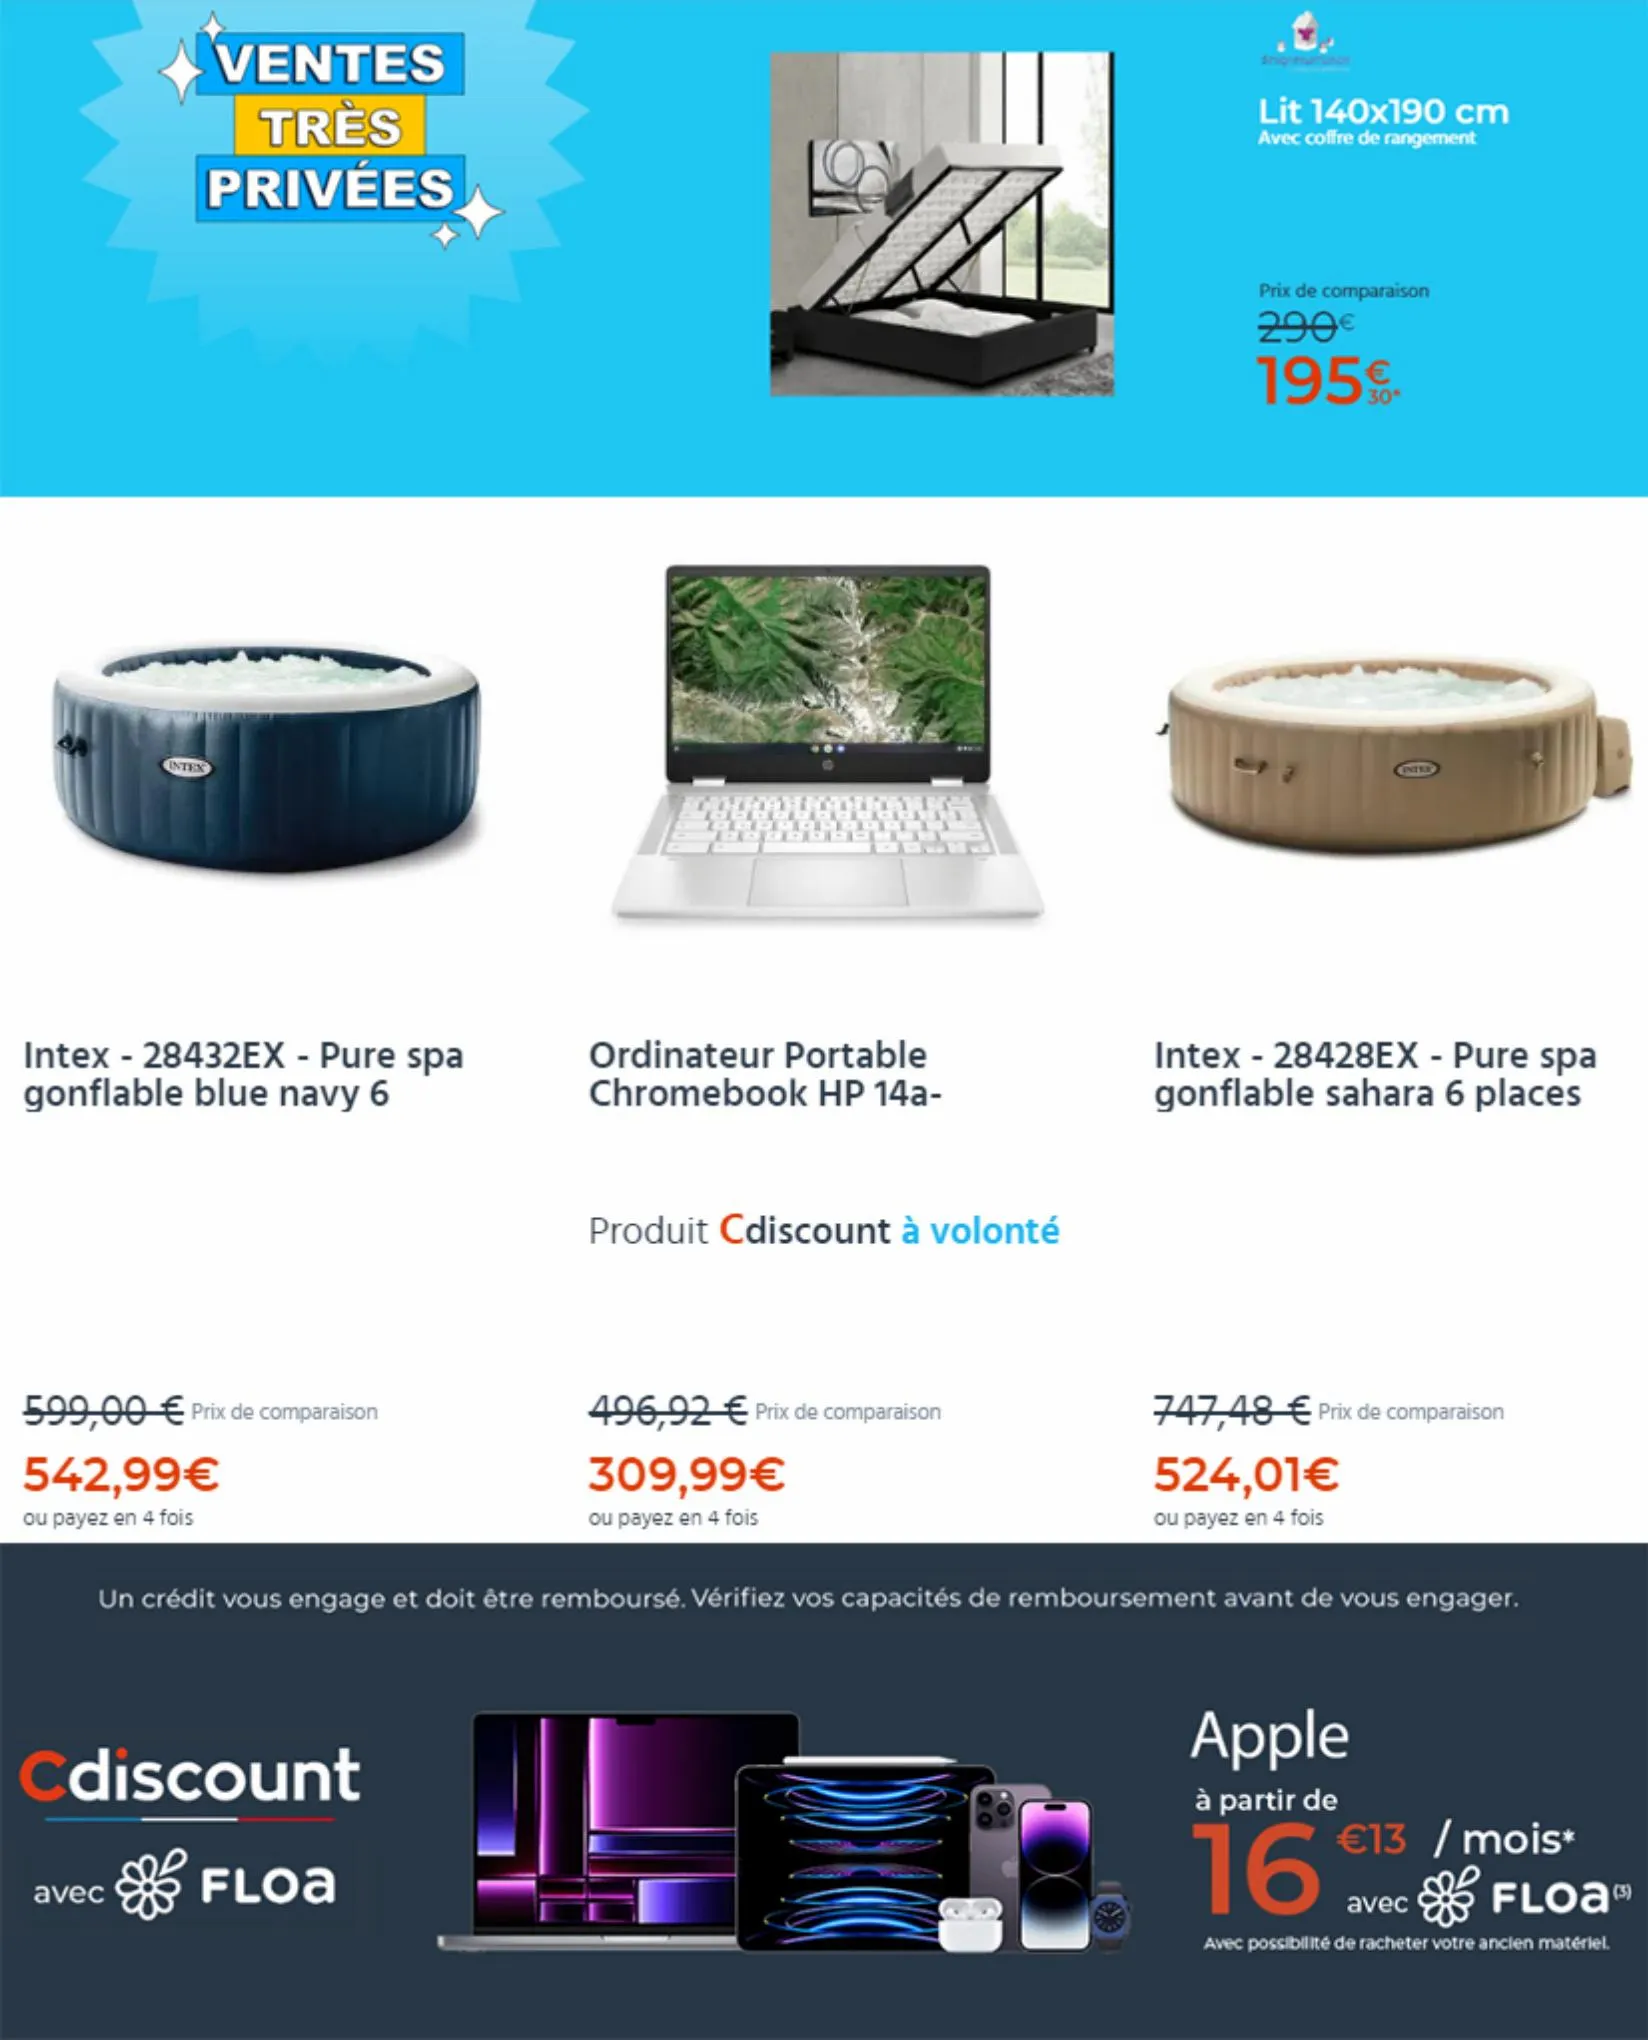 Catalogue Offres Speciales Cdiscount, page 00005